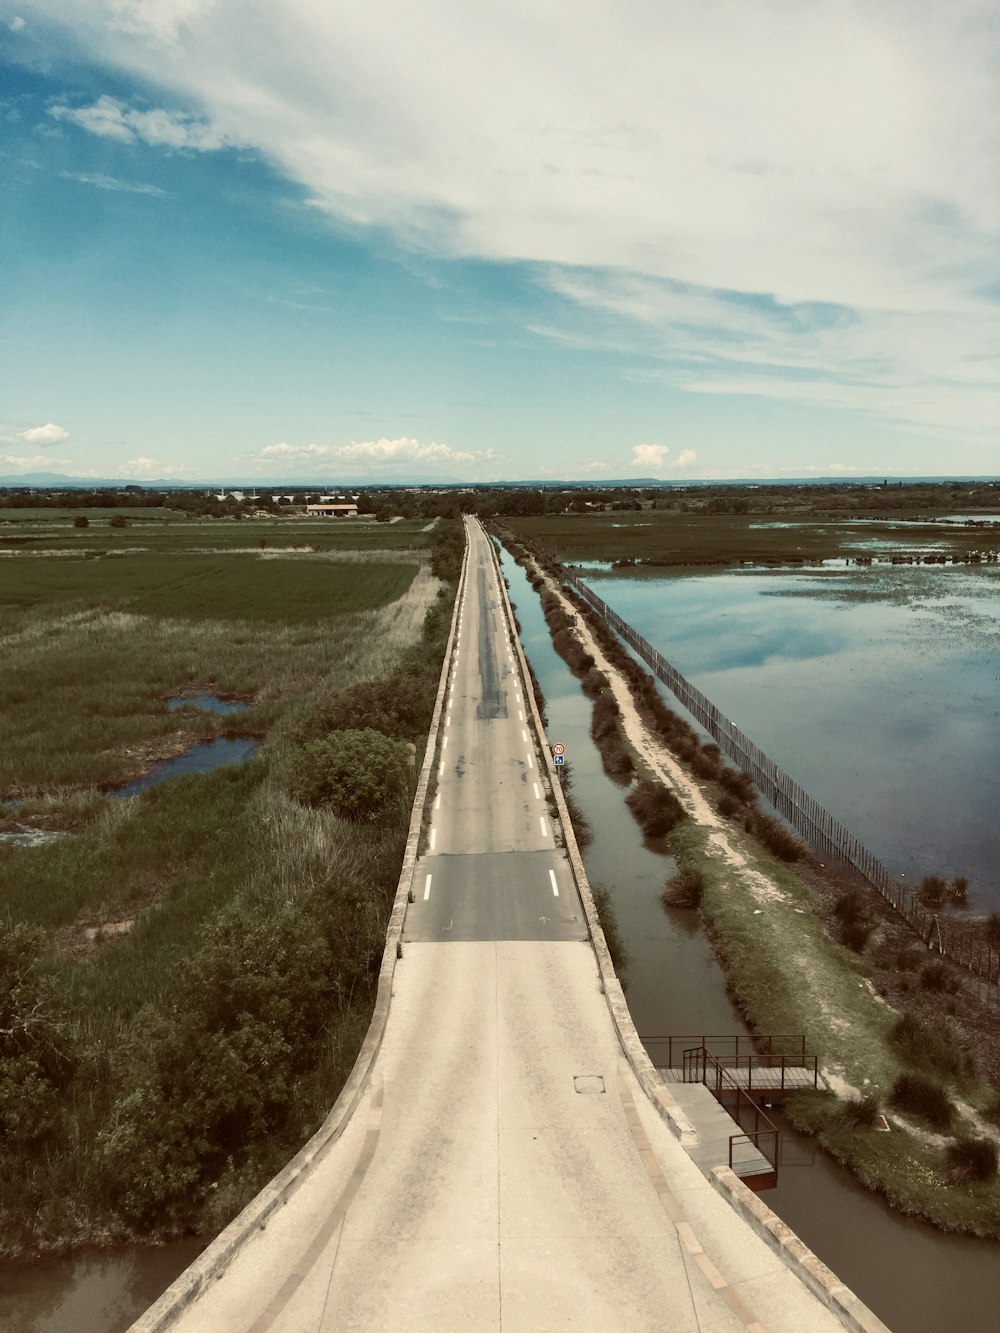 gray concrete road beside body of water under blue sky during daytime